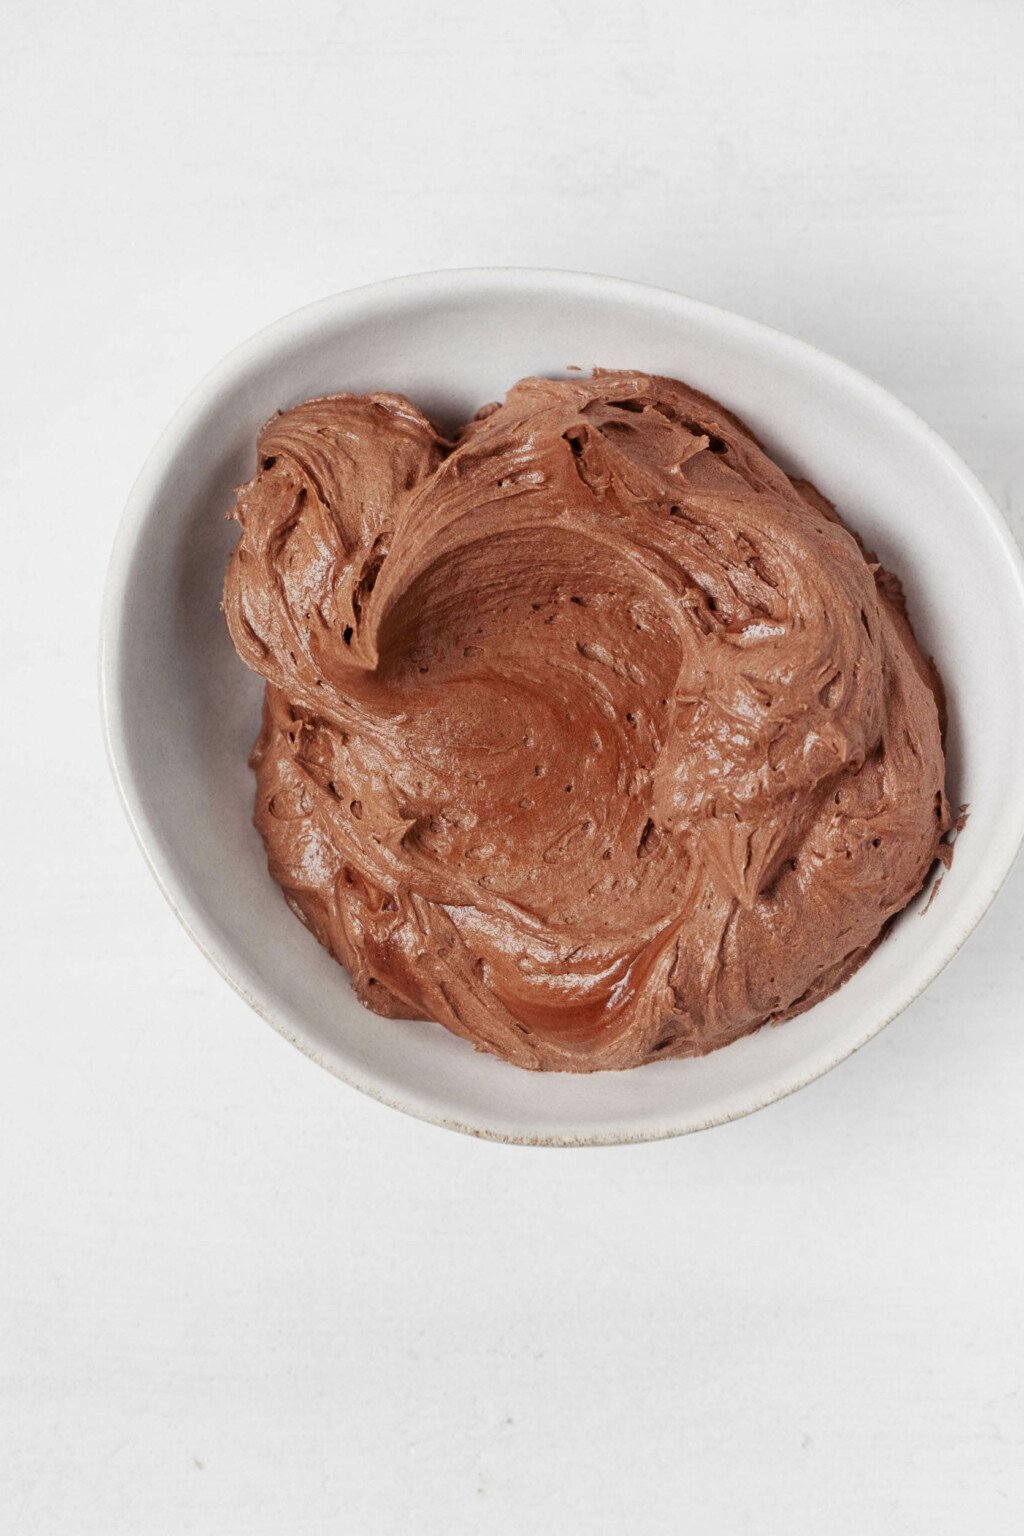 A swirl of vegan chocolate frosting is served in a small, asymmetrical ceramic bowl.  It is located on a white surface.